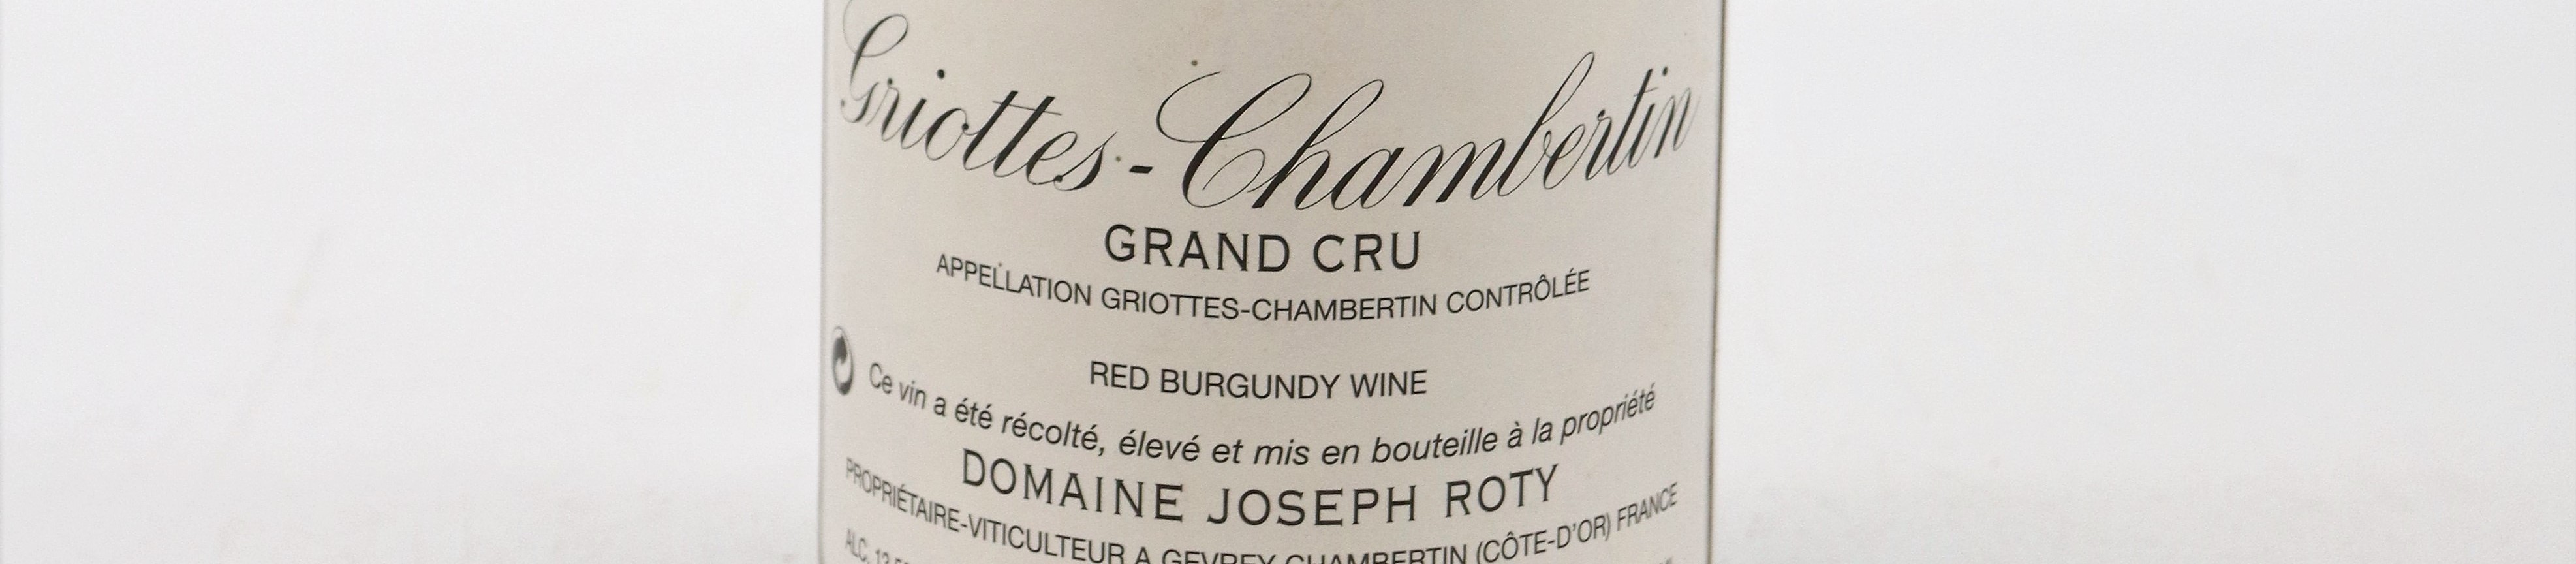 The picture shows a bottle of wine from Domaine Joseph Roty, Burgundy